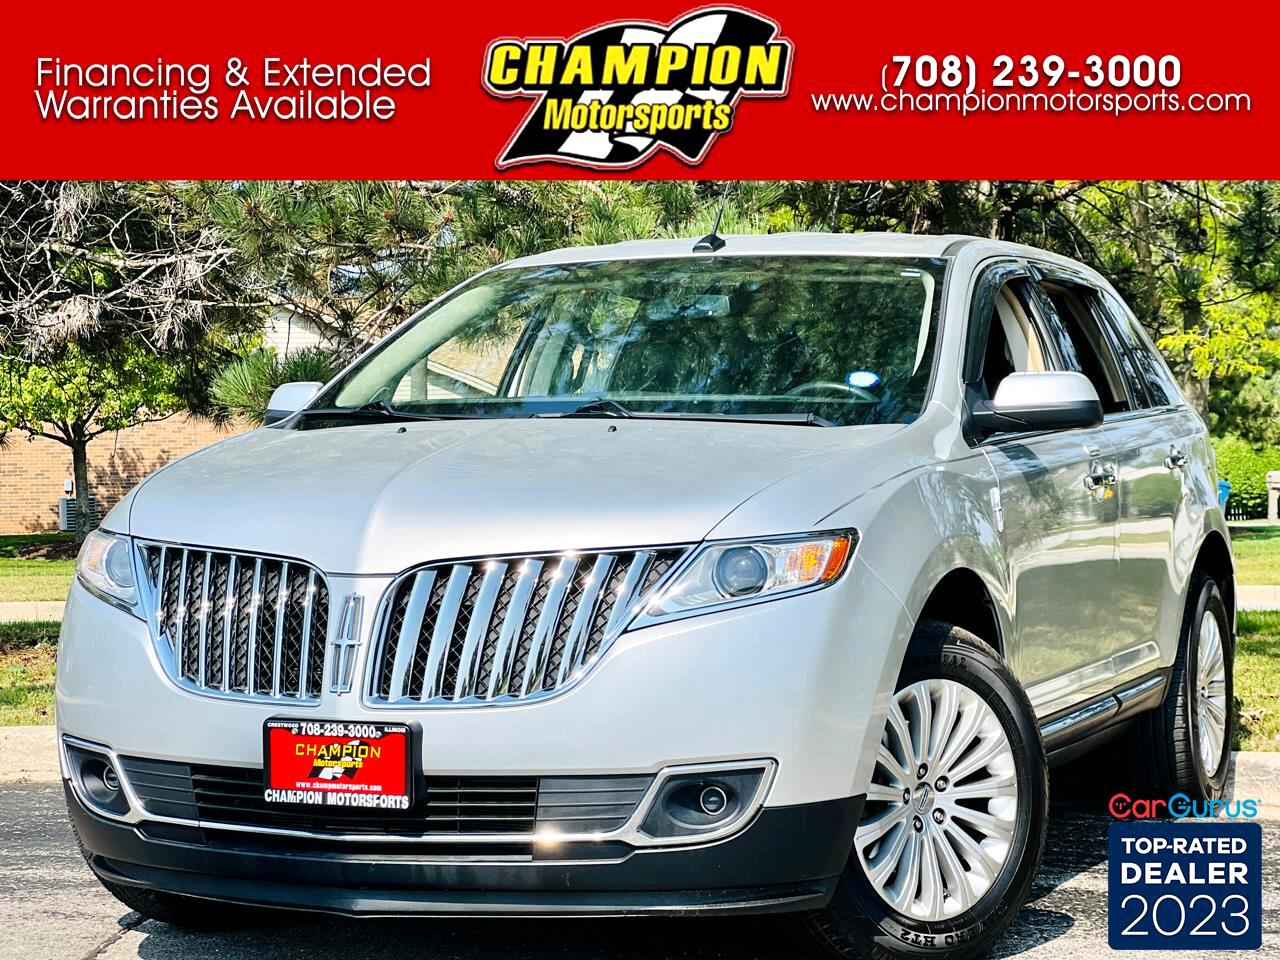 2012 Lincoln MKX FWD 4dr